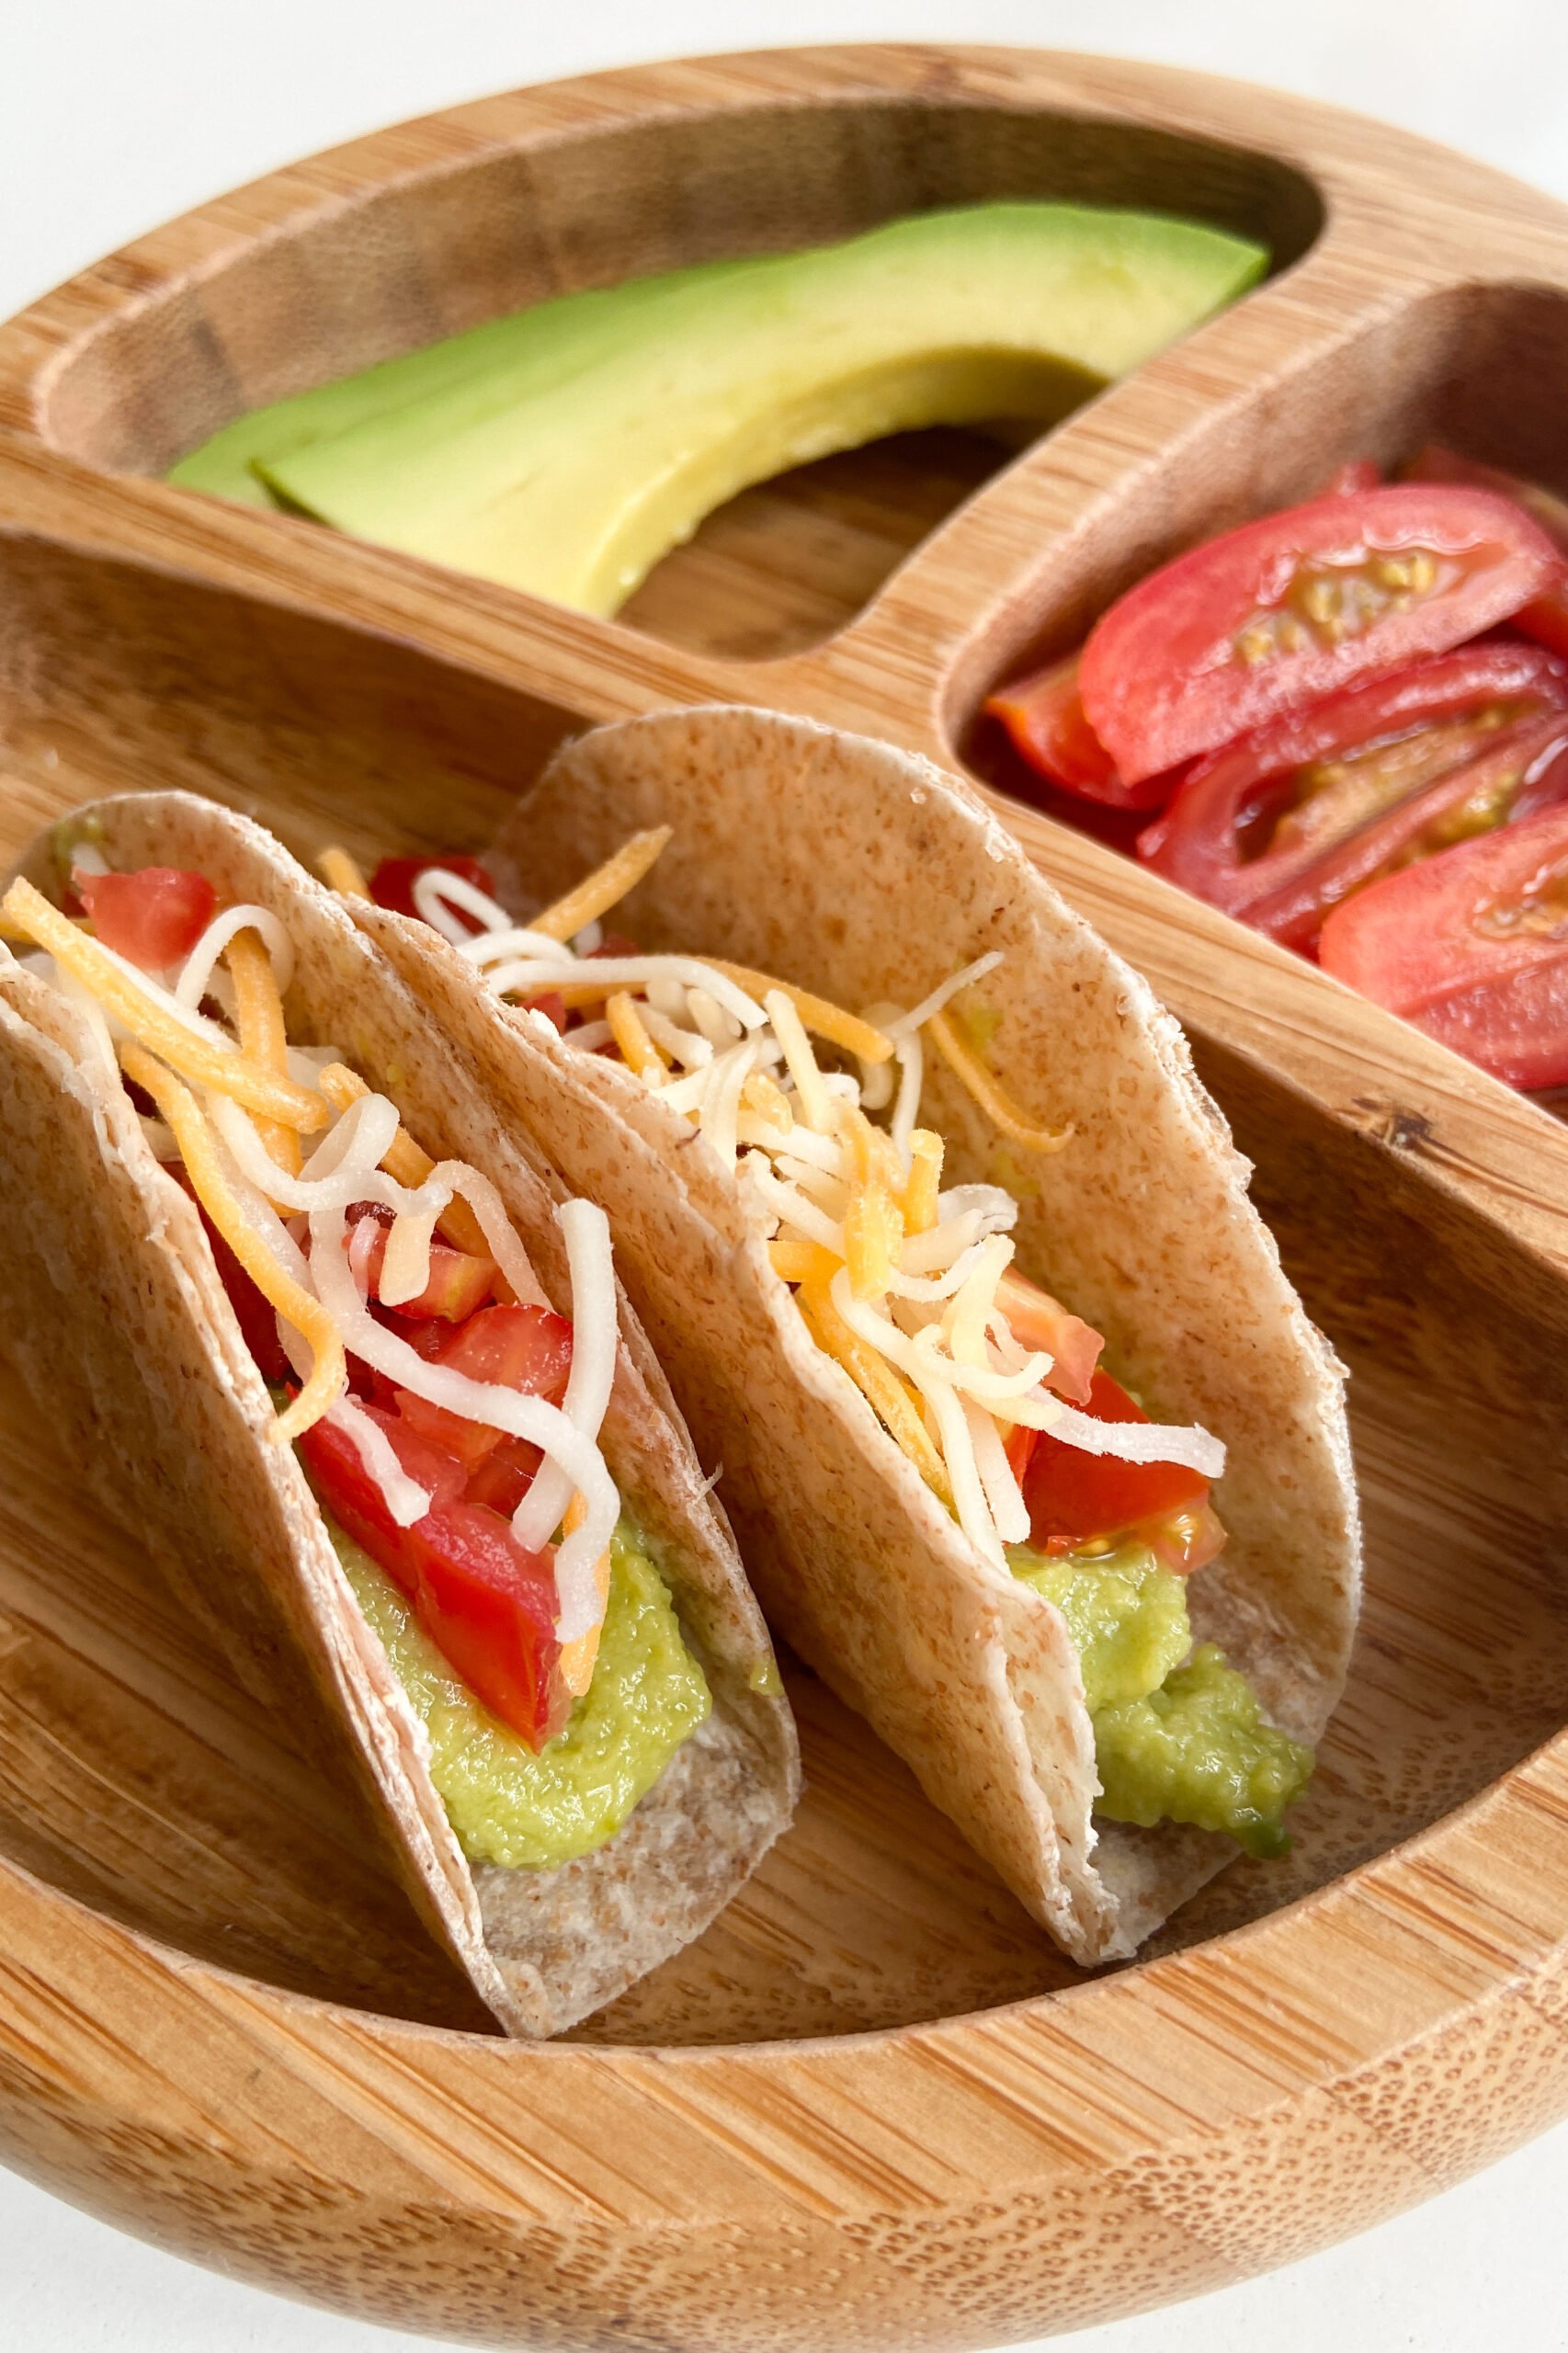 No cook taco served with avocado slices and quartered tomatoes